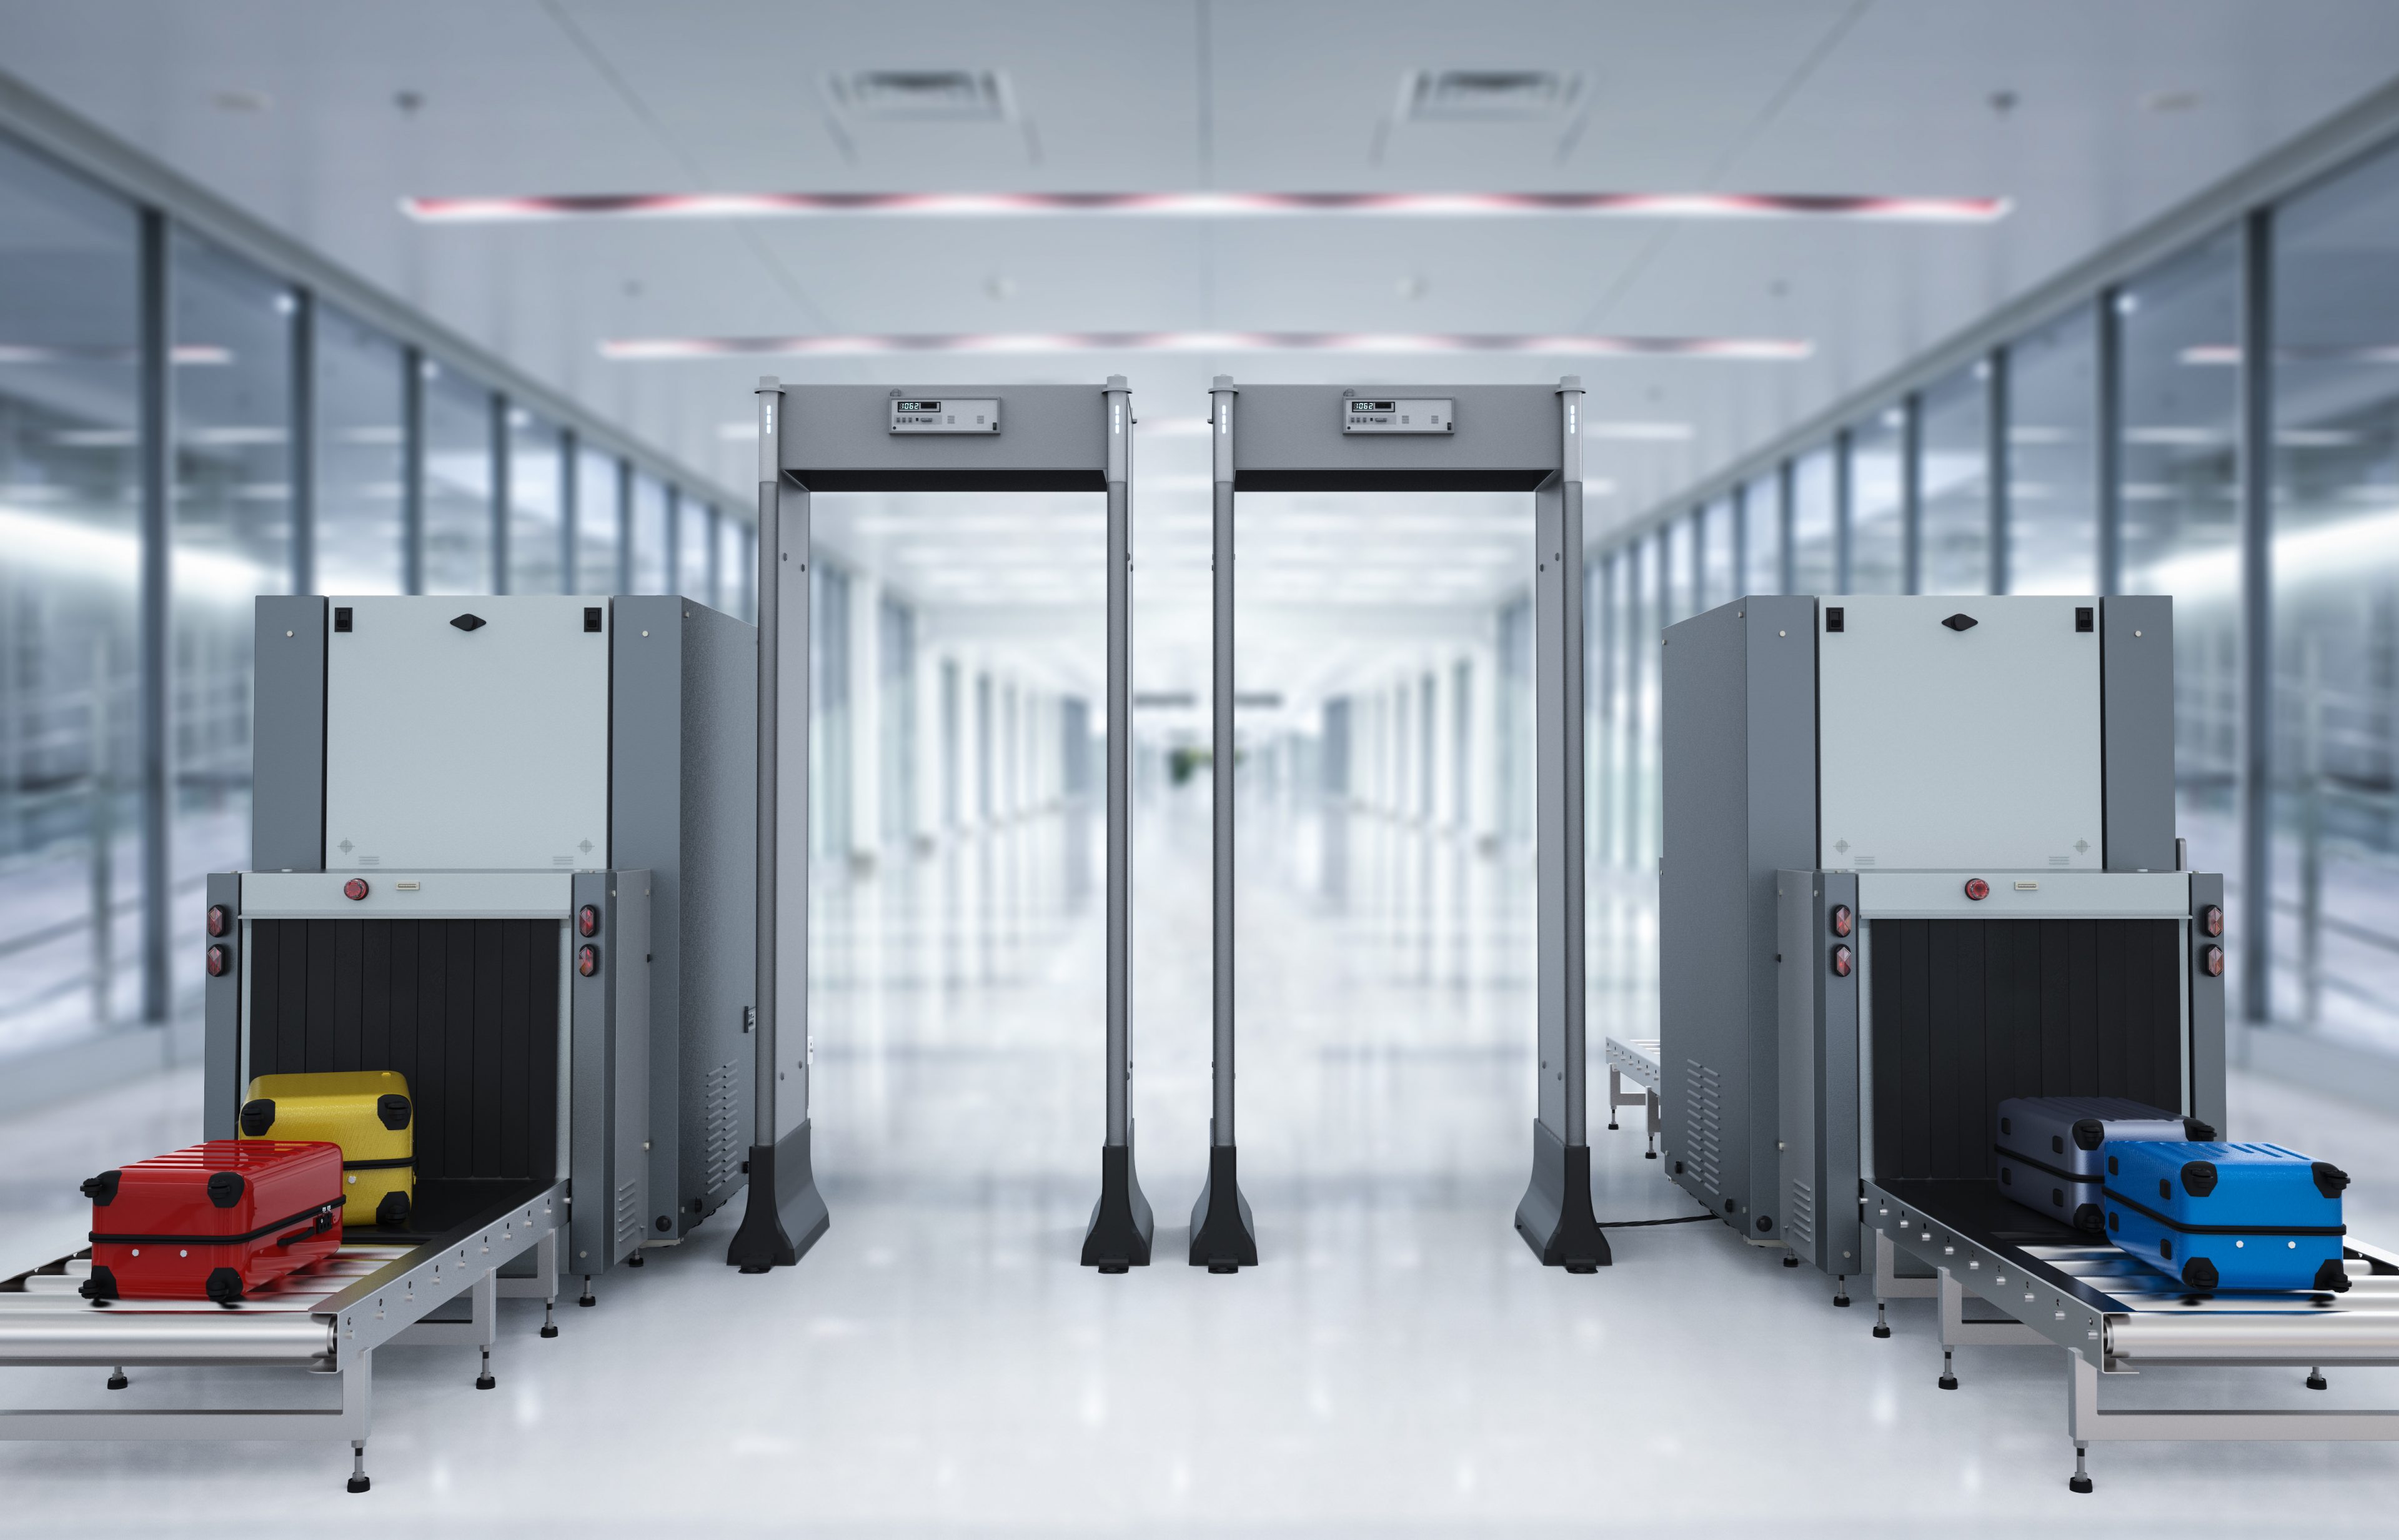 Xray machines and scanners at an airport or border.